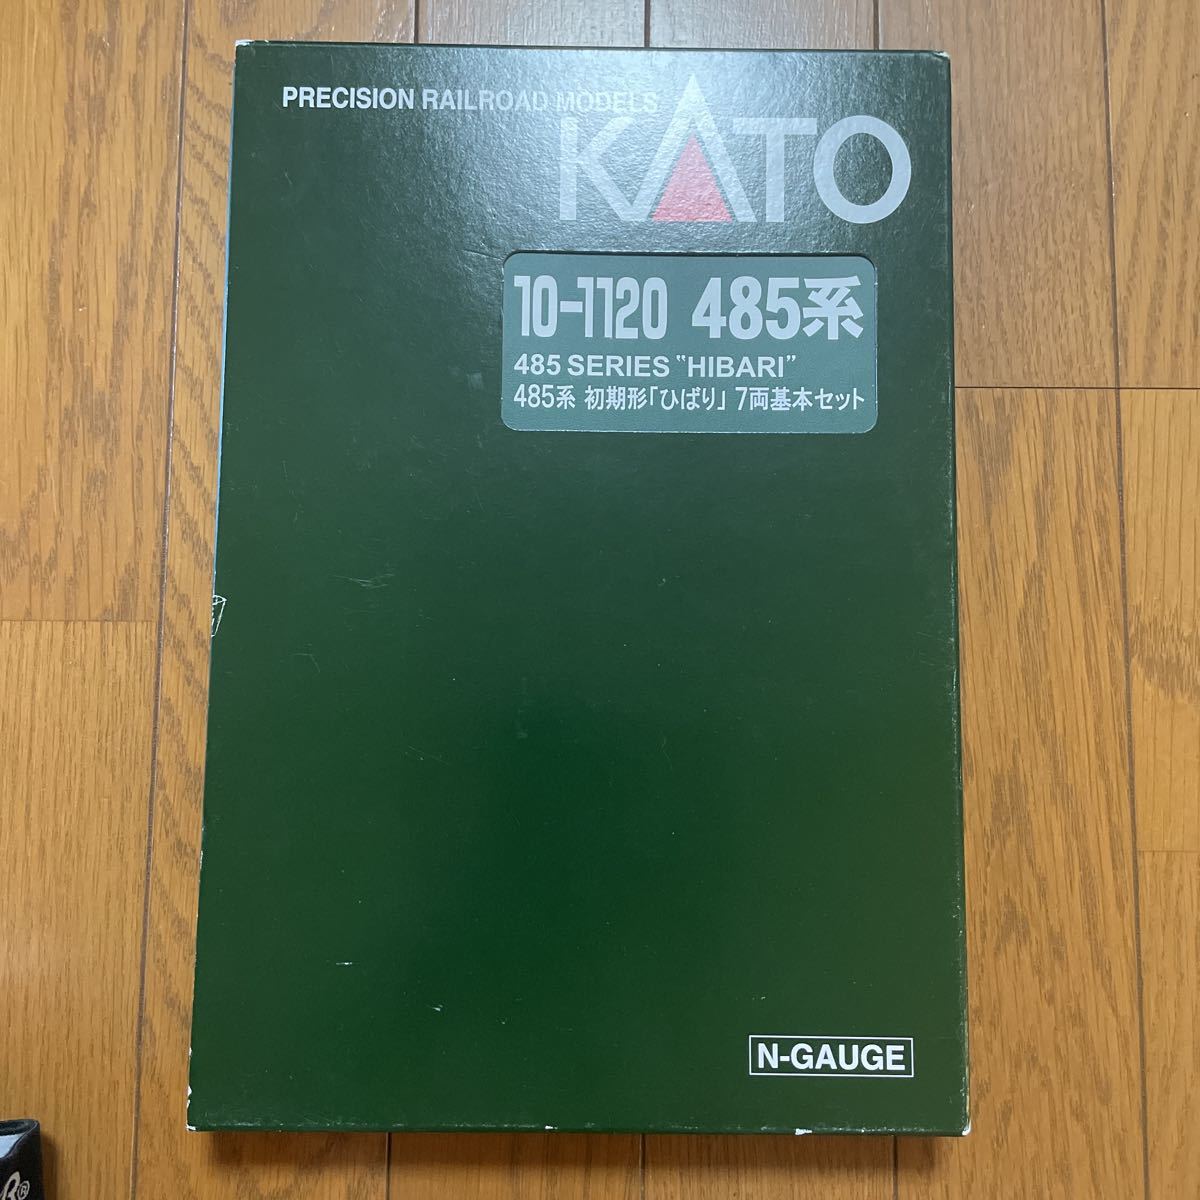 KATO 485系電車・初期型 ひばり 7両基本セット 10-1120(中古)の